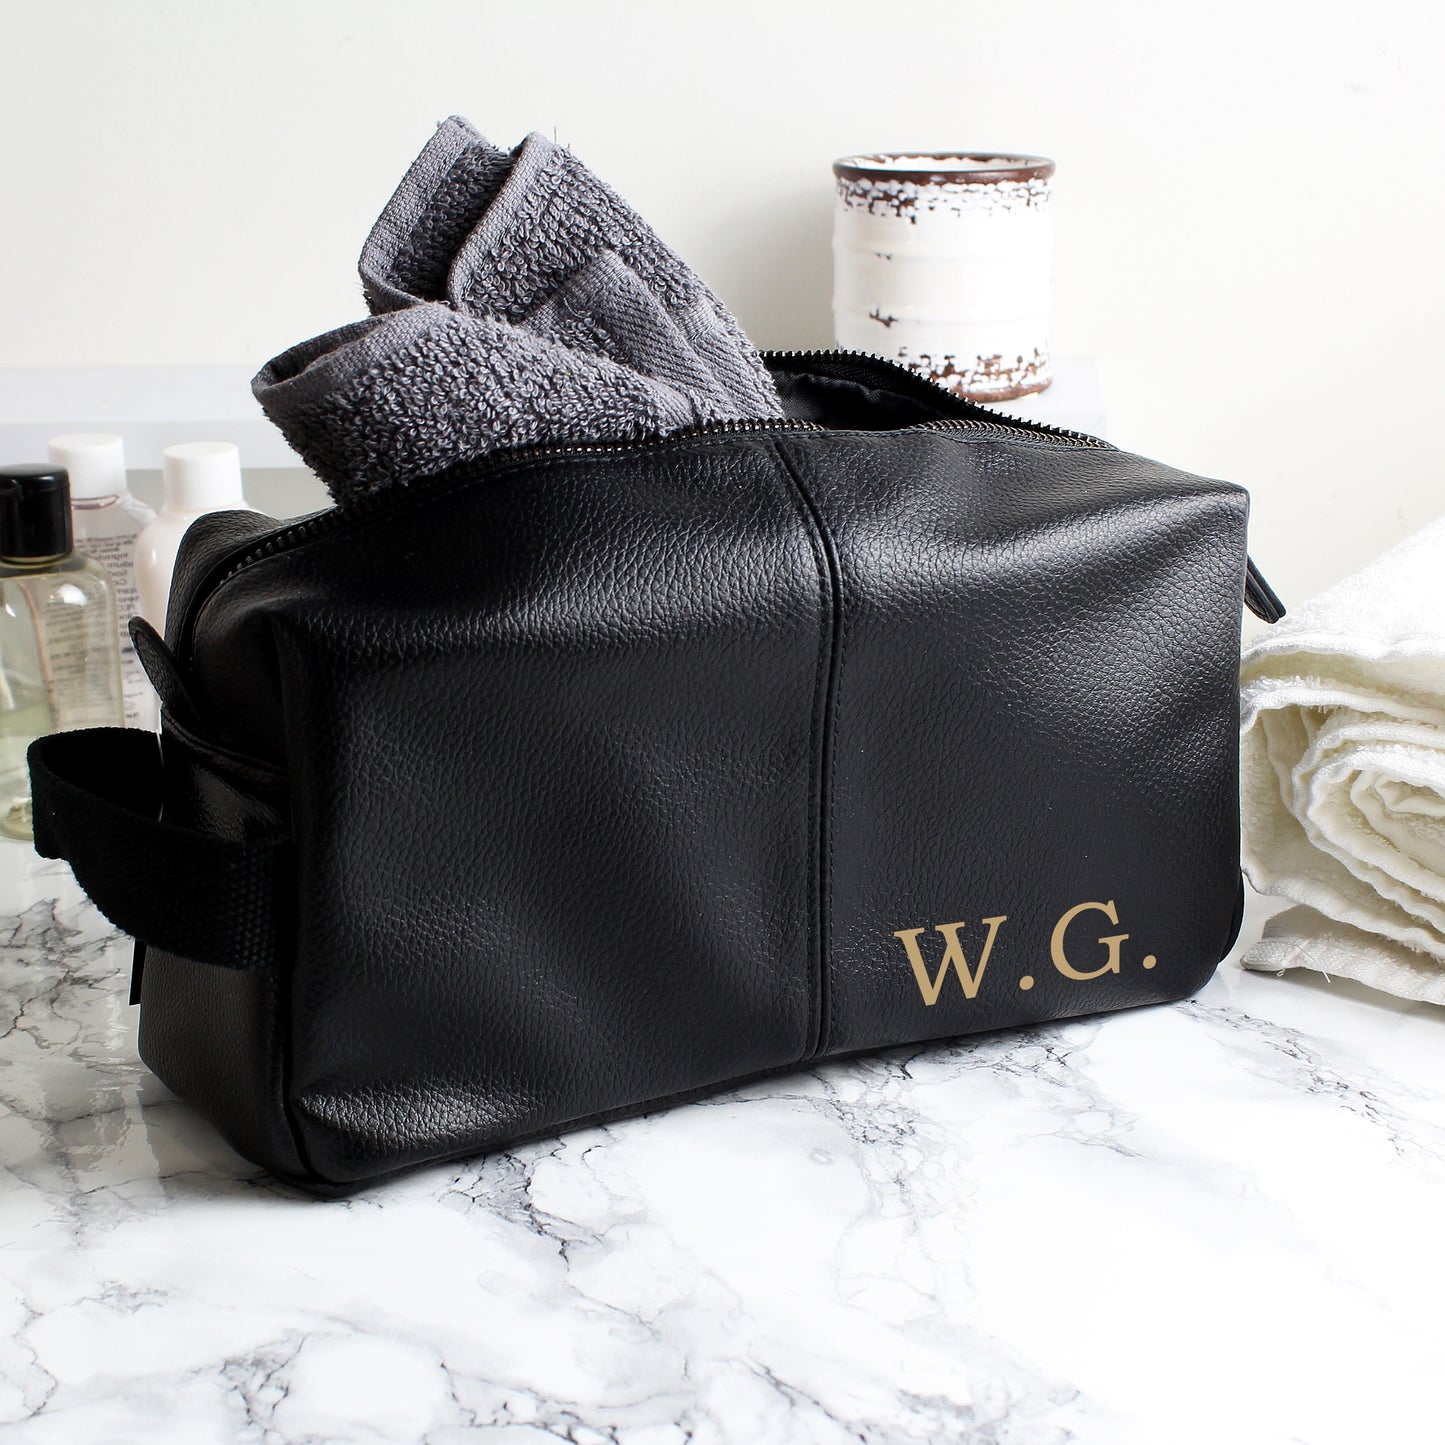 Luxury initials black leatherette wash bag - Lilybet loves